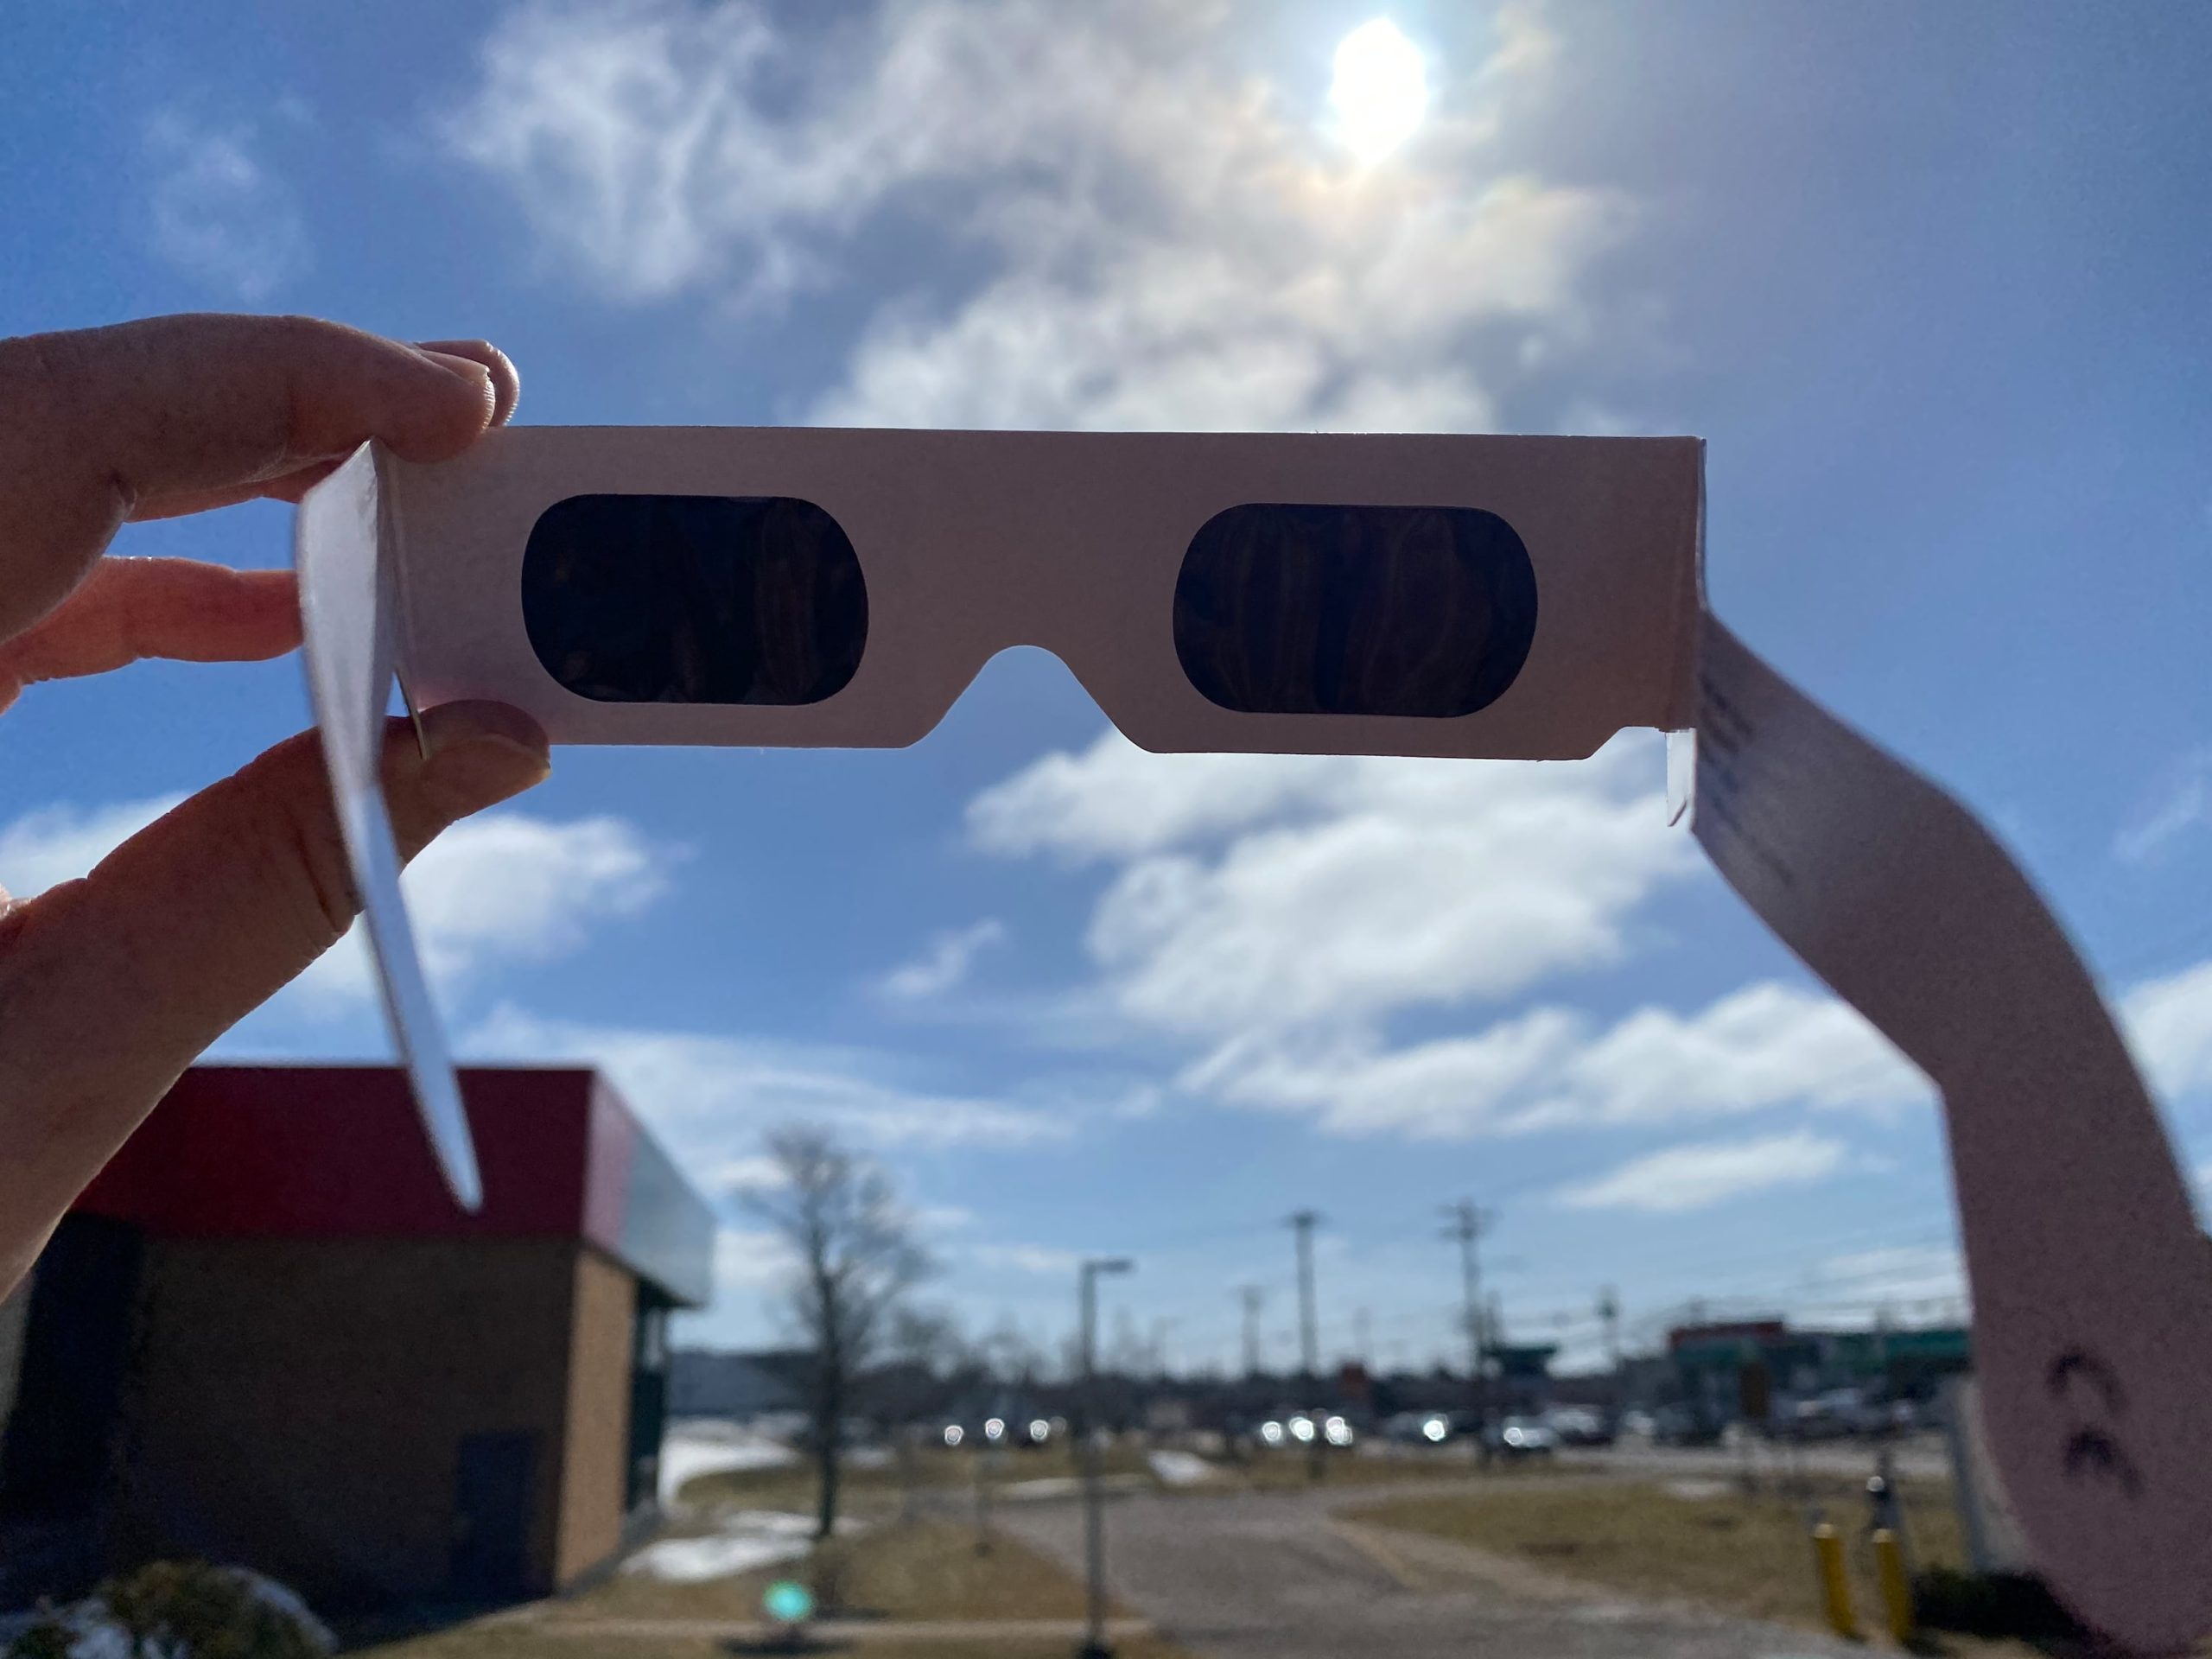 P.E.I. students will get solar glasses in advance of the total eclipse [Video]